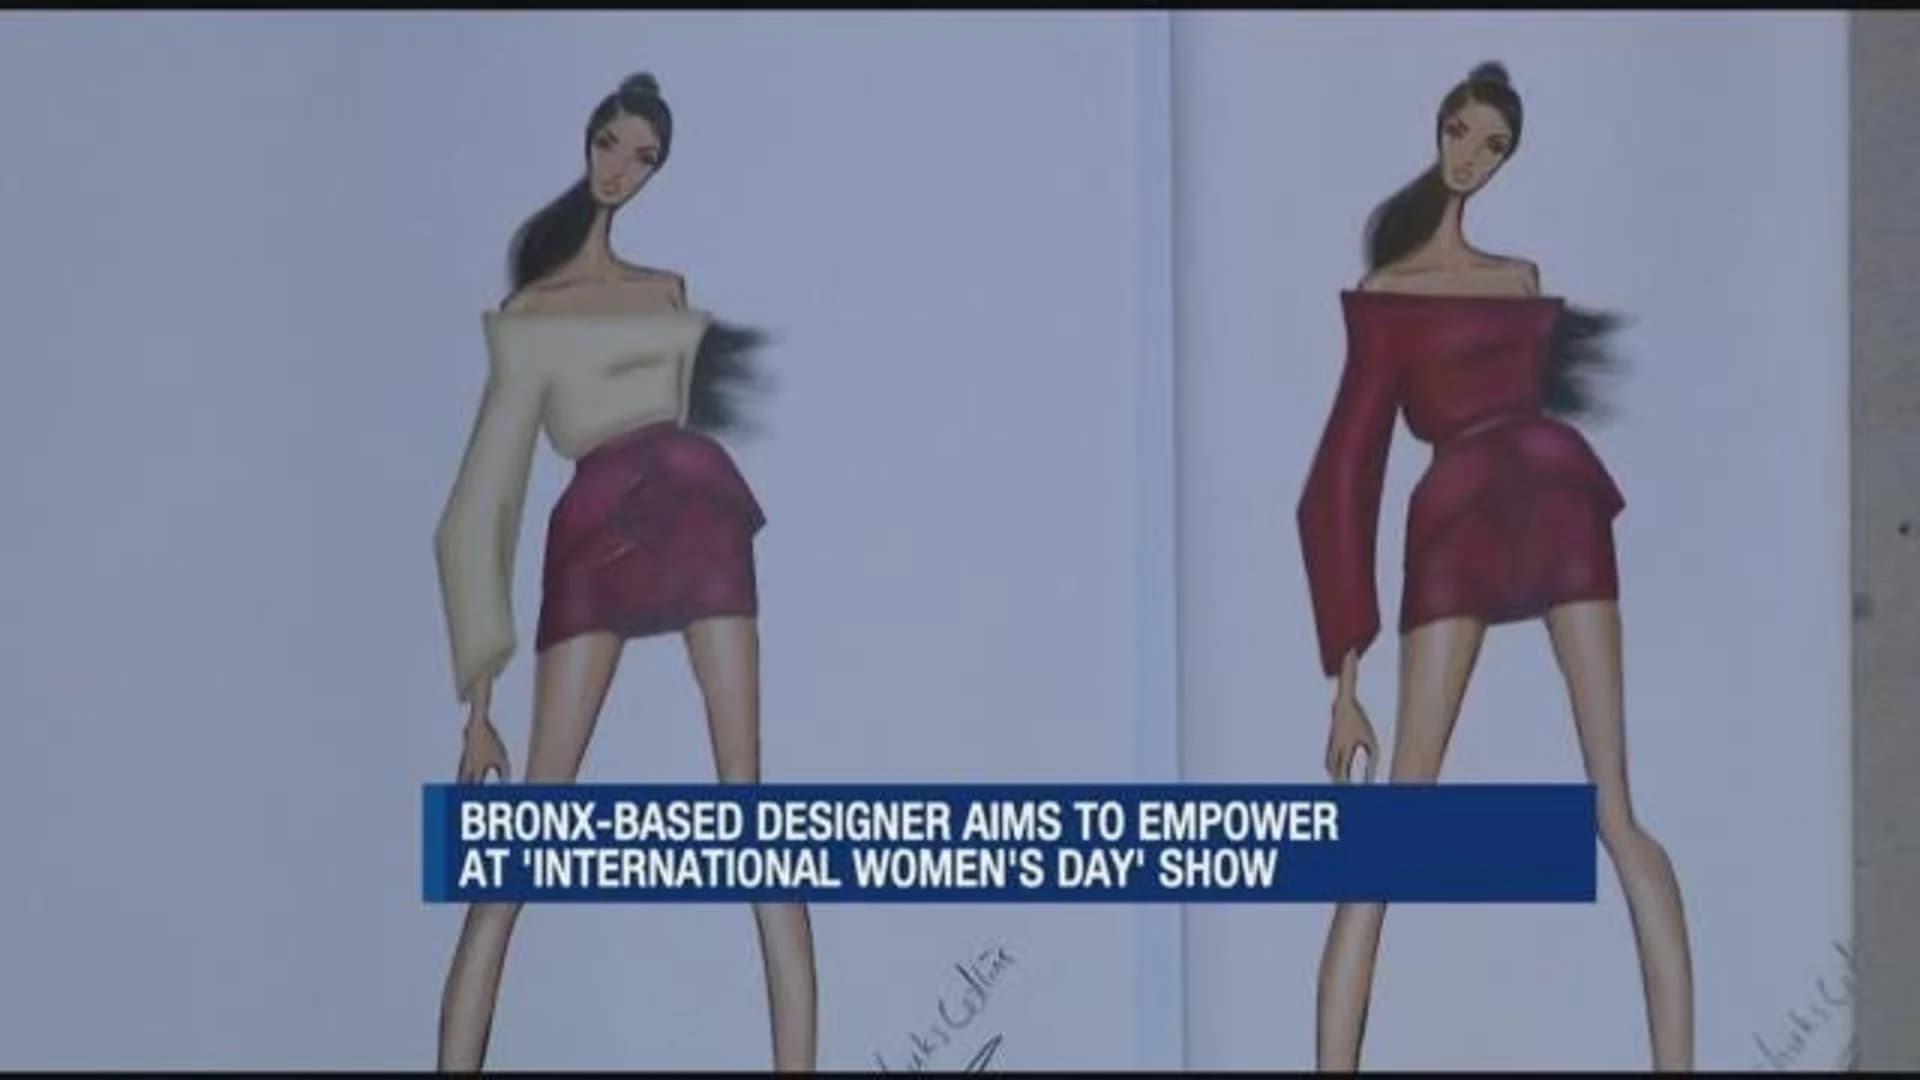 Bronx-based designer aims to empower at International Women's Day show